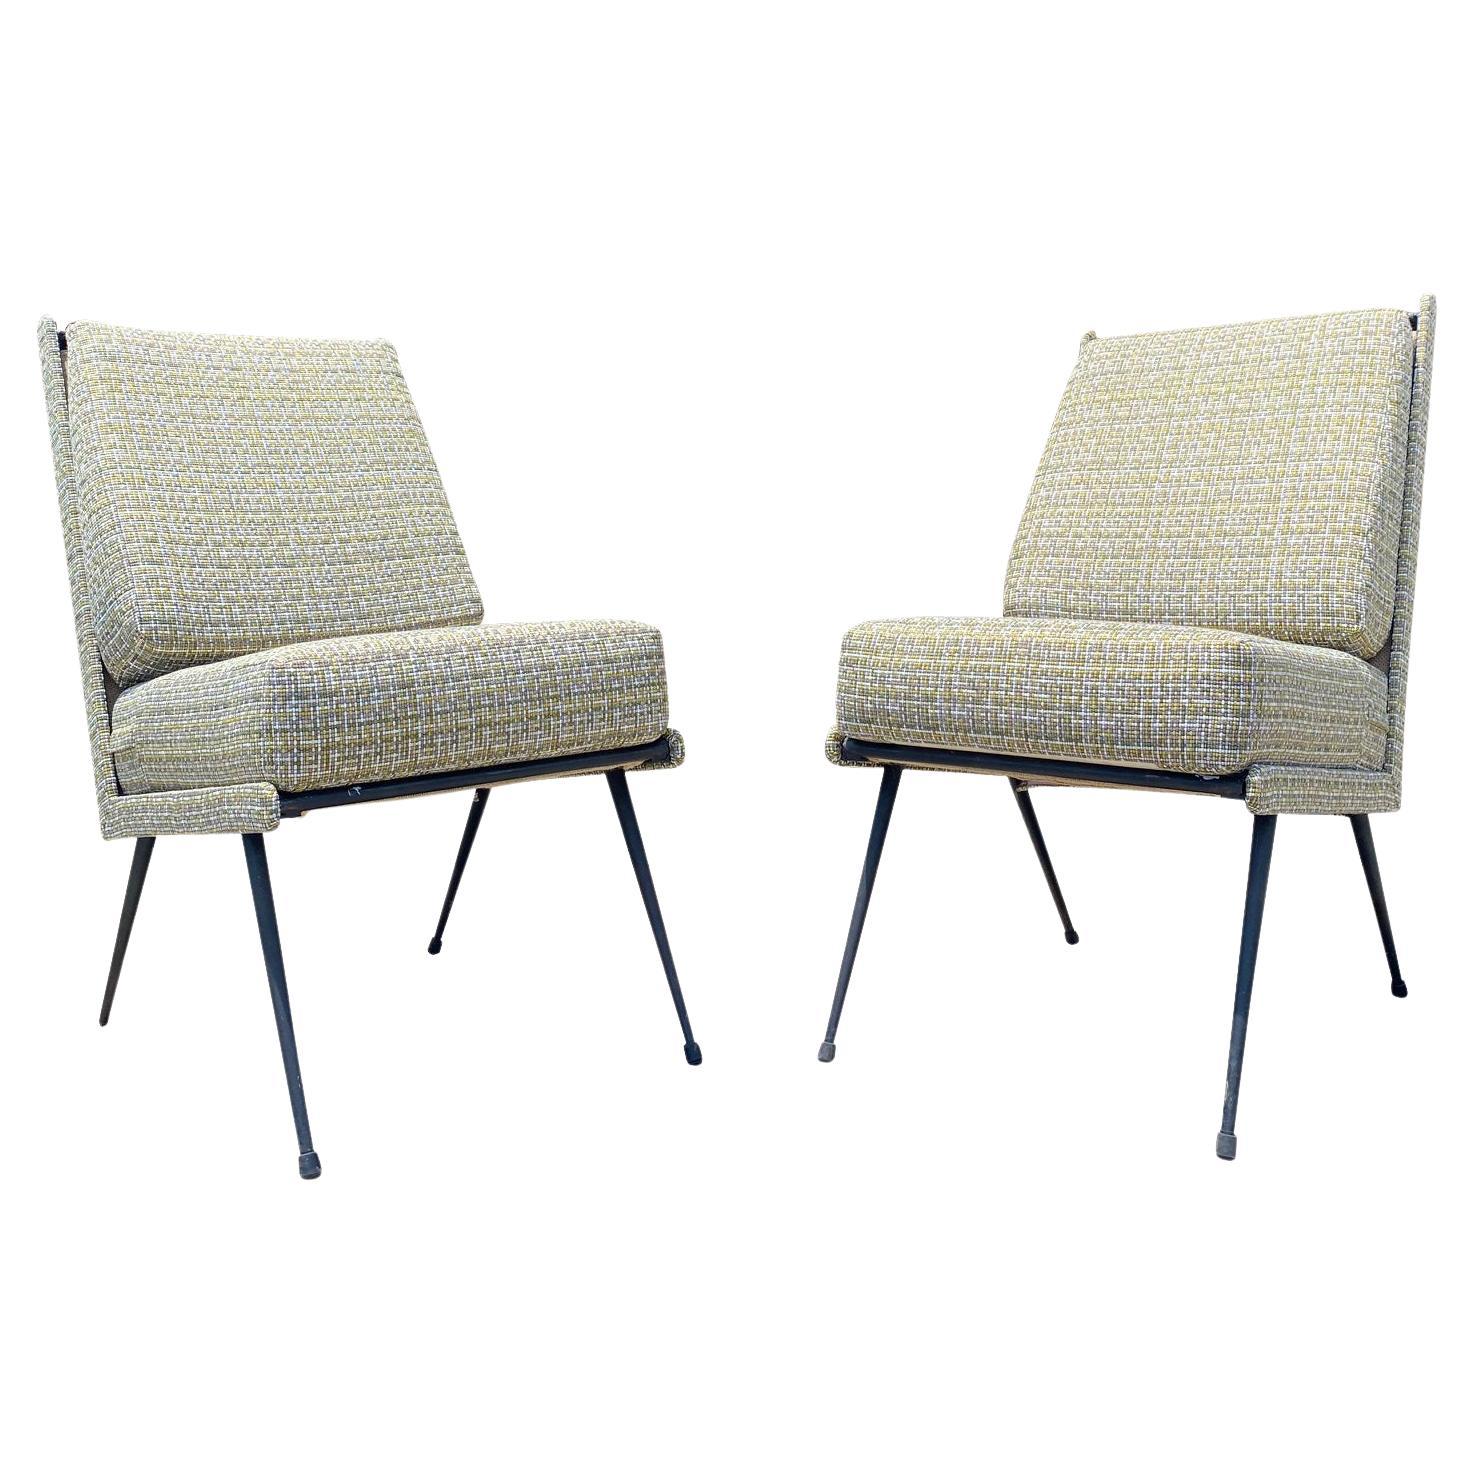 Pair of Modernist Angular Slipper Chairs, Italy, 1950s For Sale